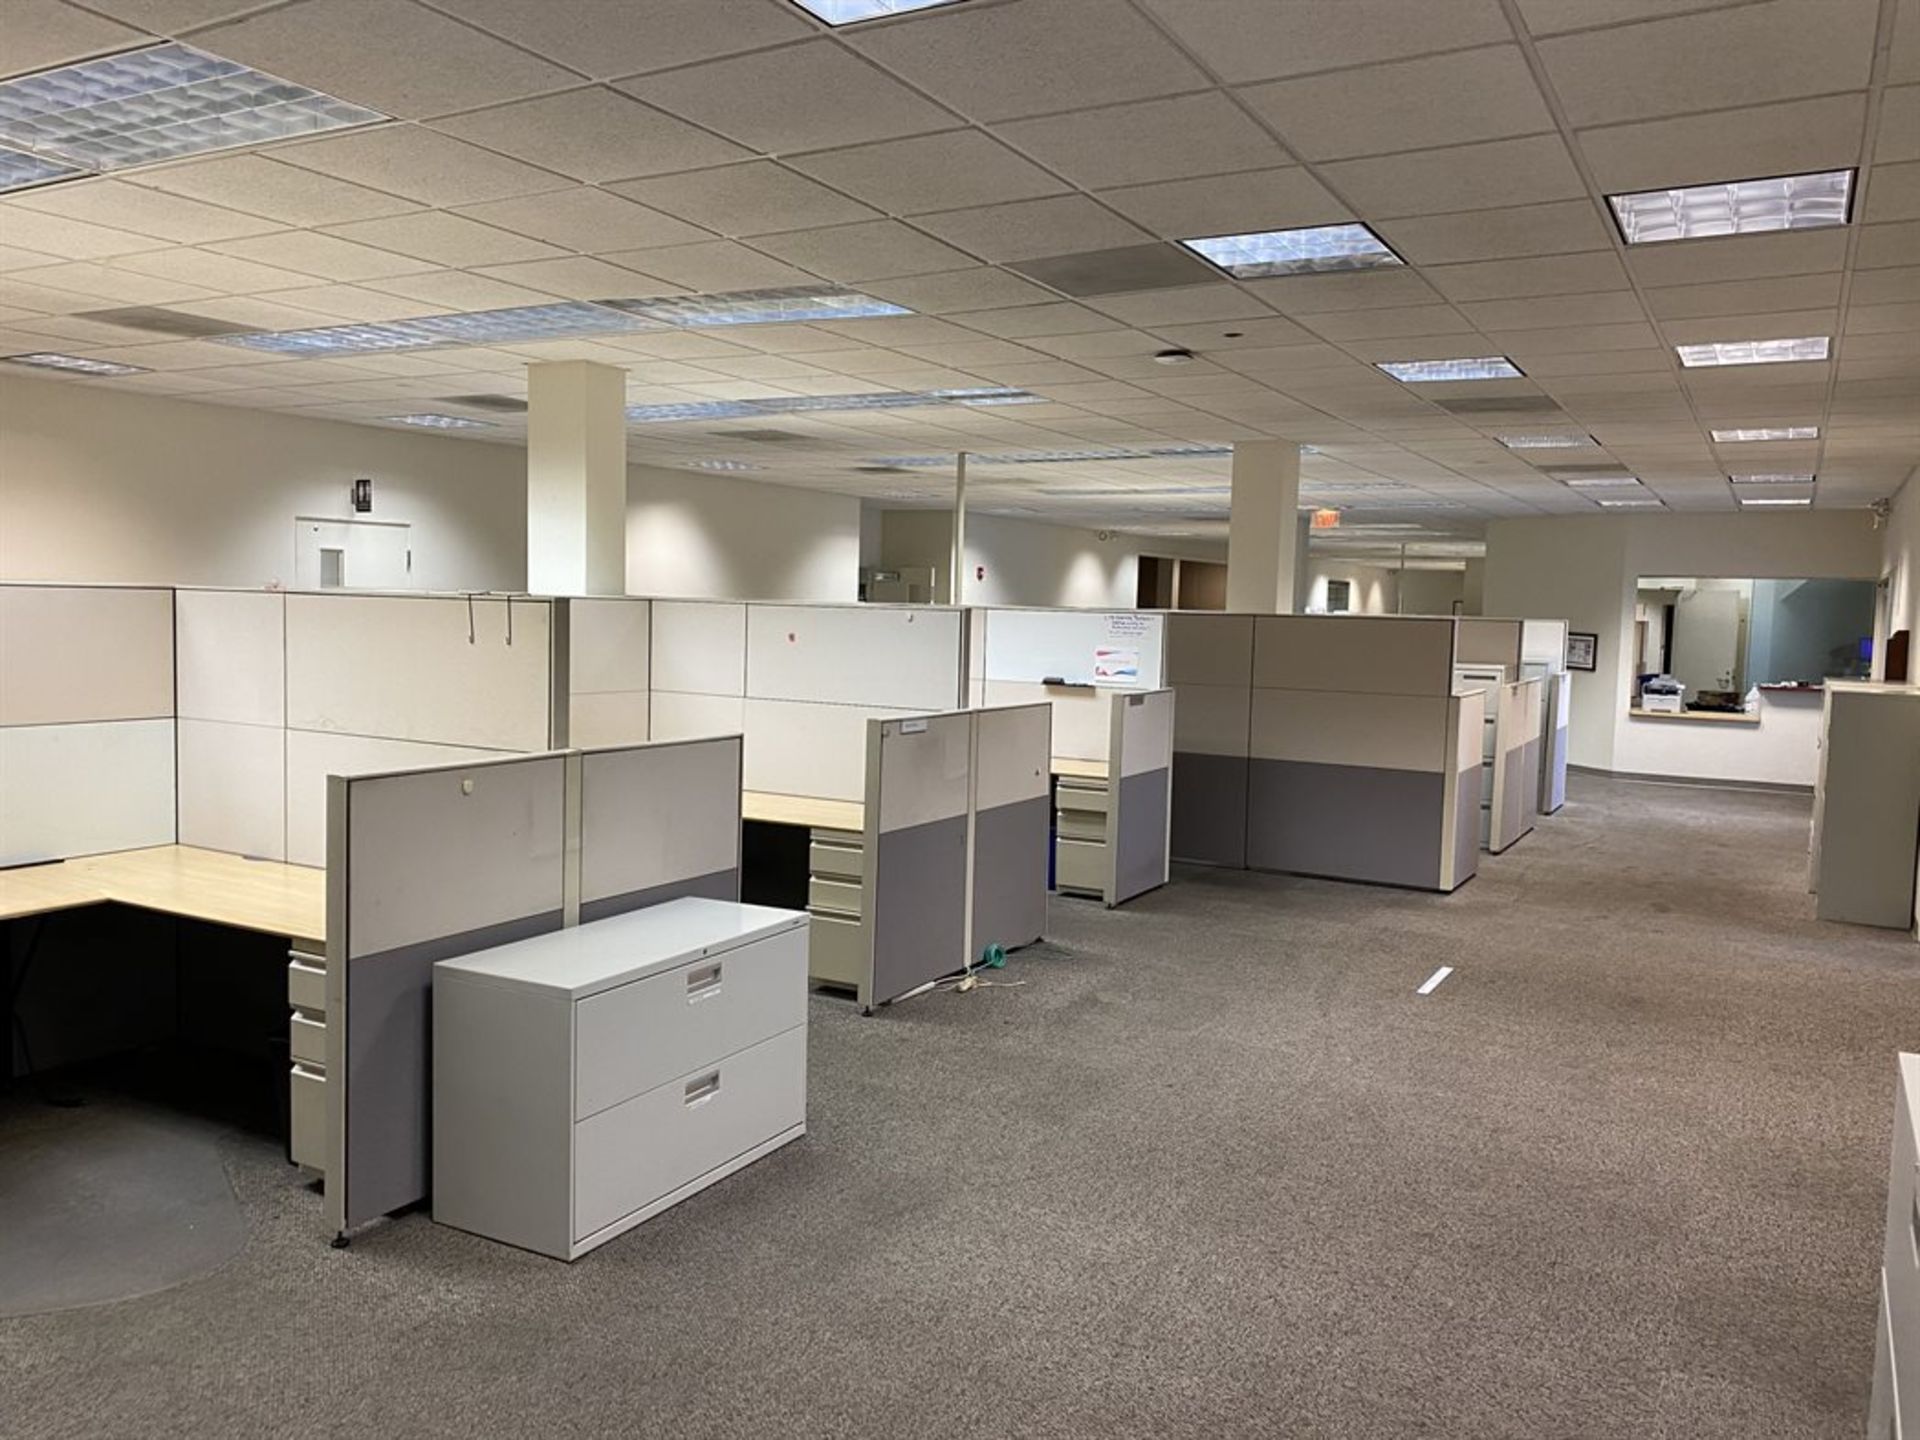 Approximately 40 Office Cubicles - Image 2 of 7